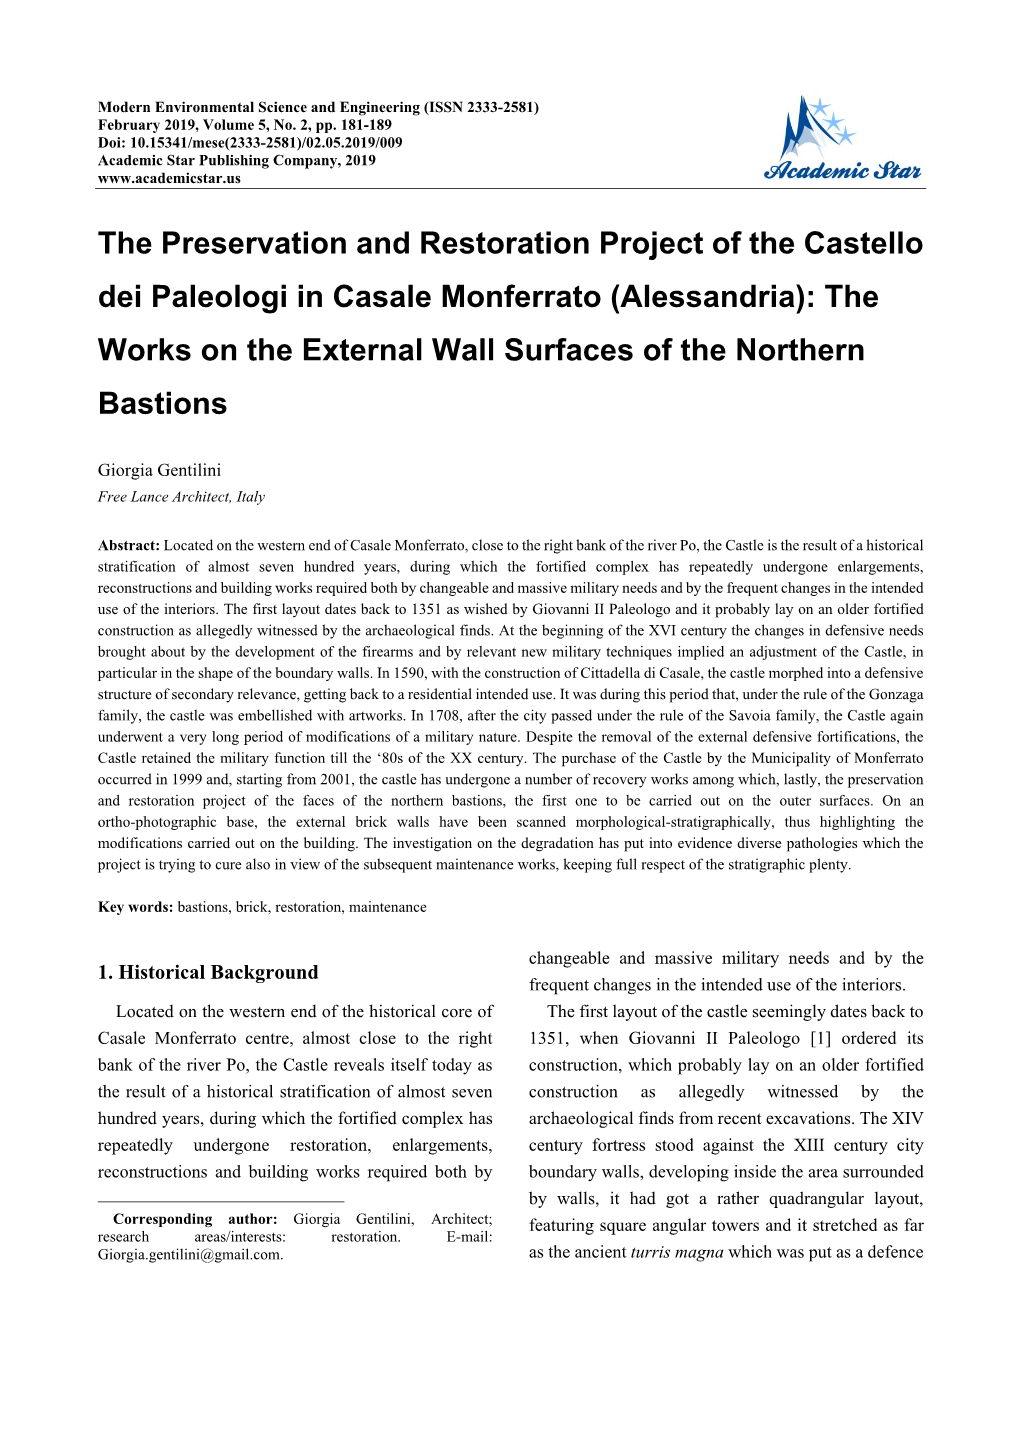 The Preservation and Restoration